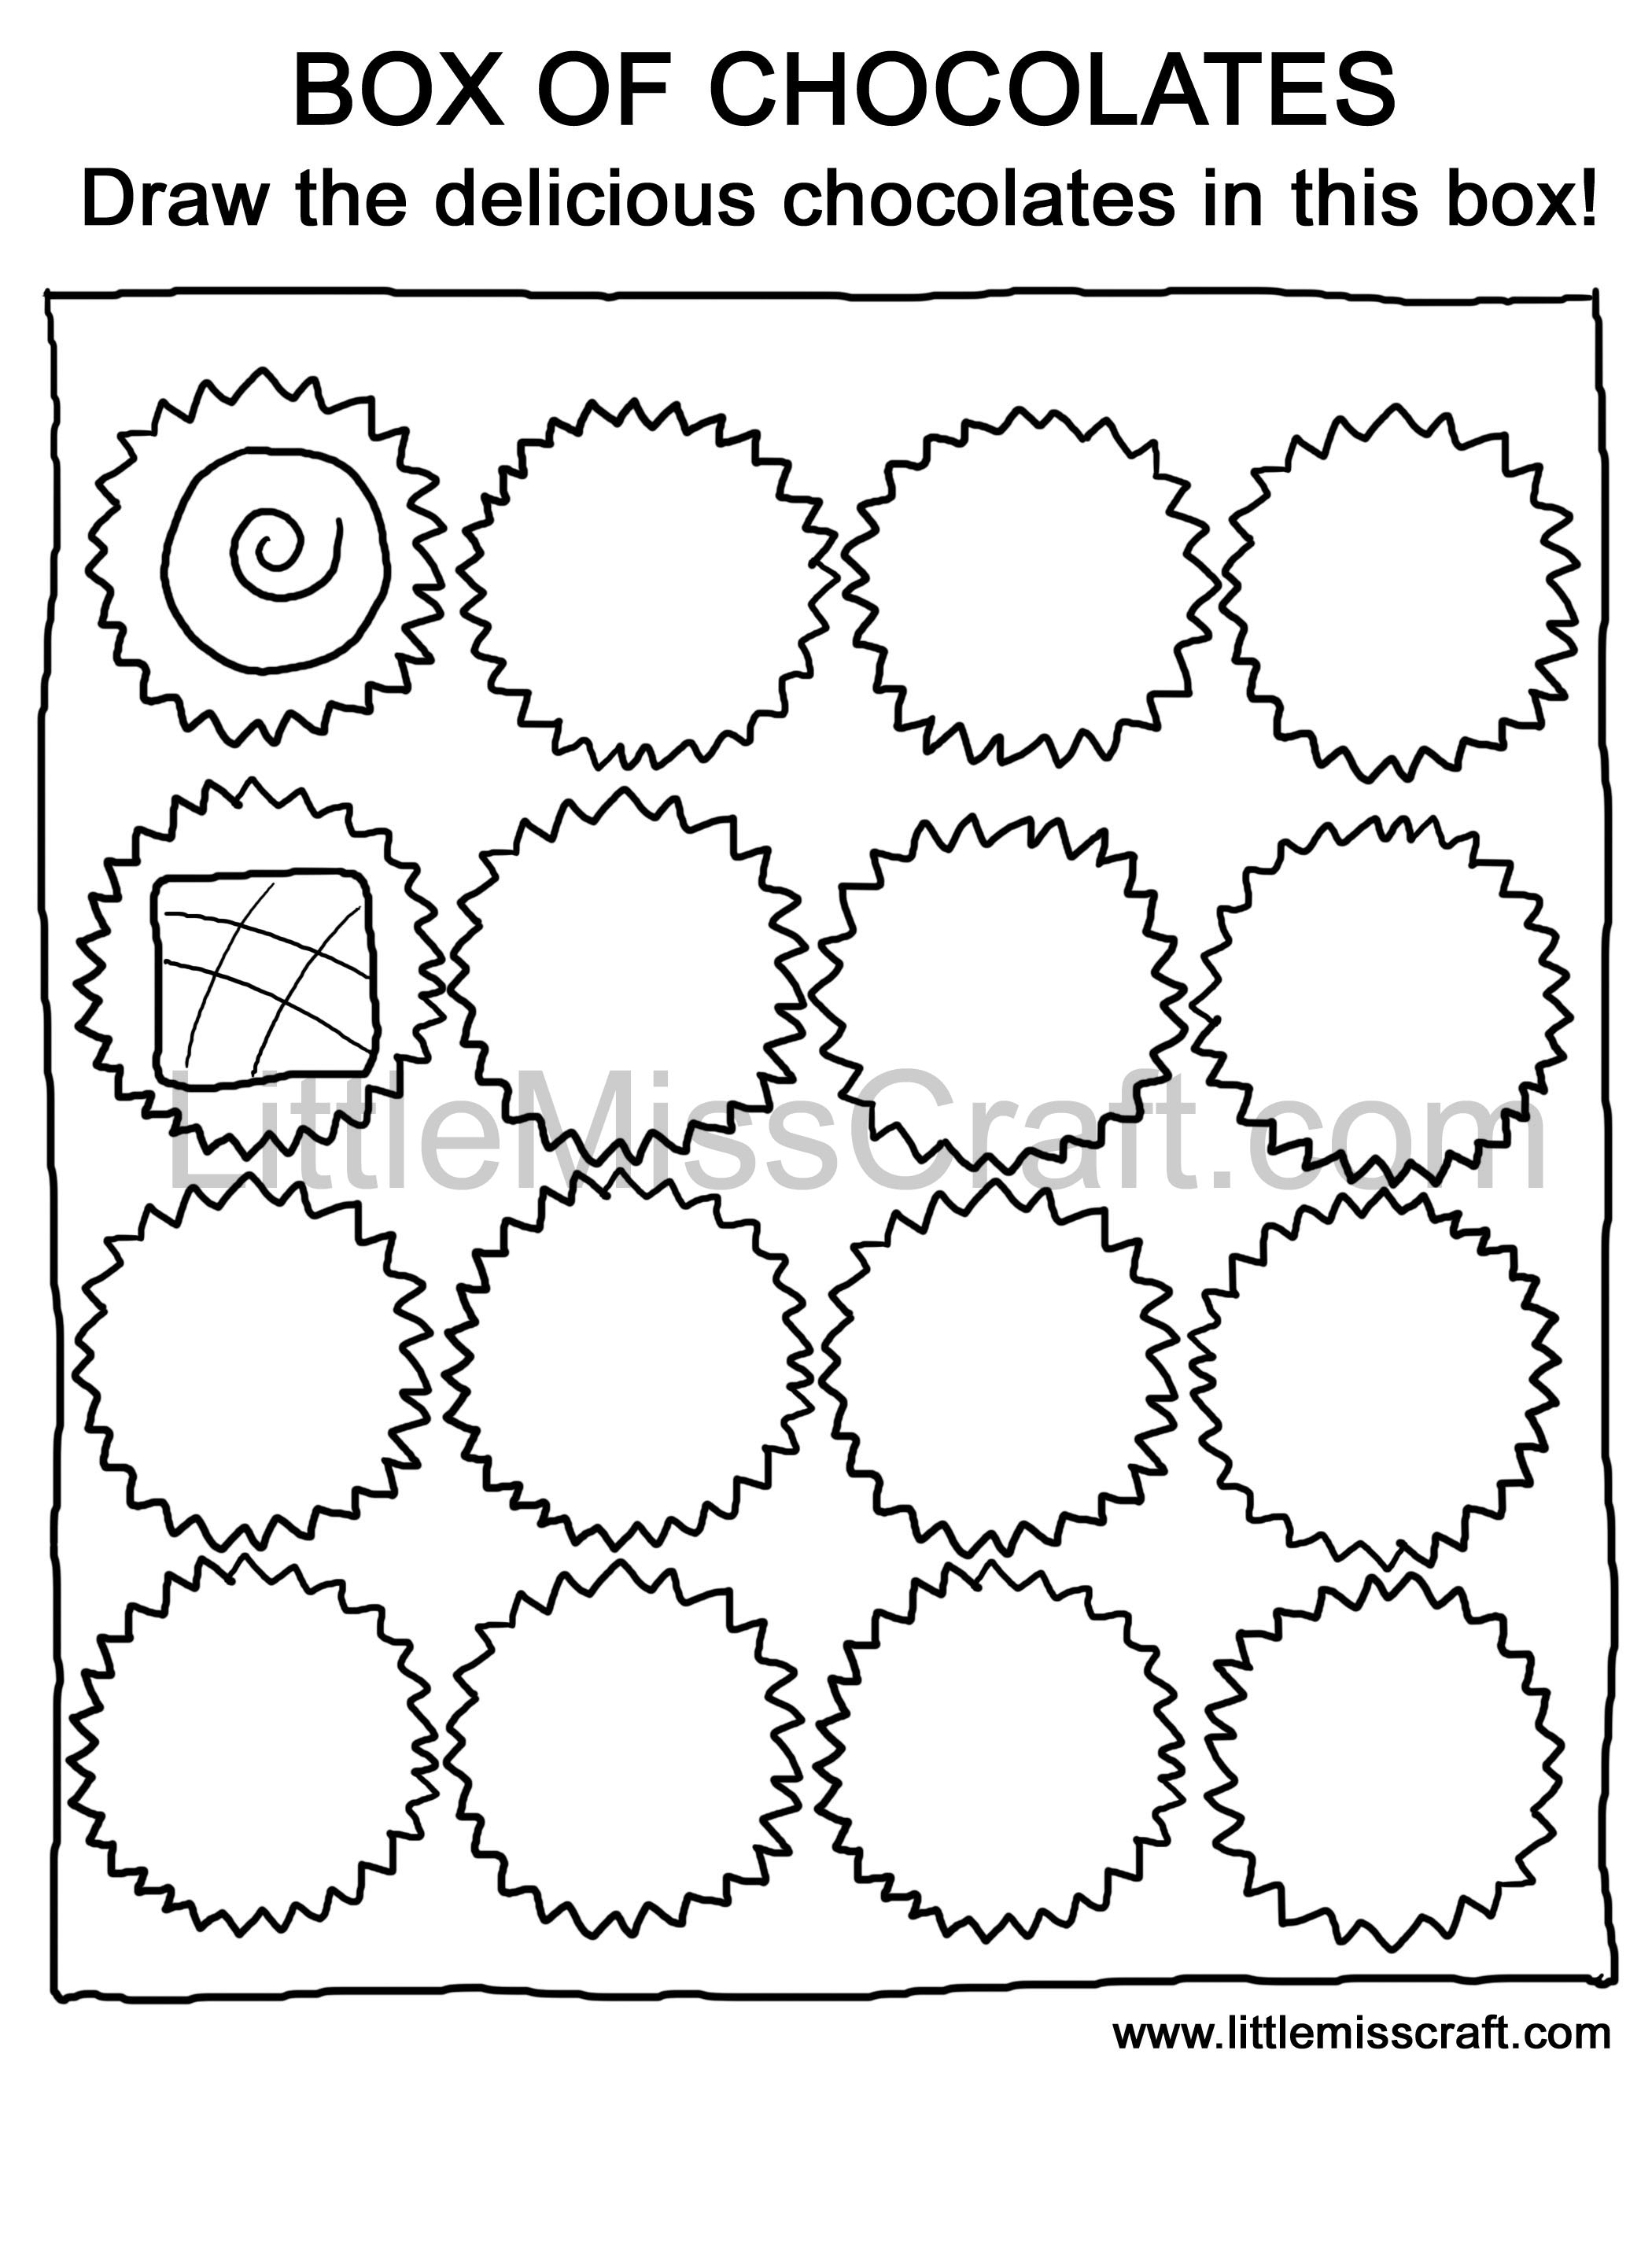 Sweets - Chocolate Doodle Coloring Page